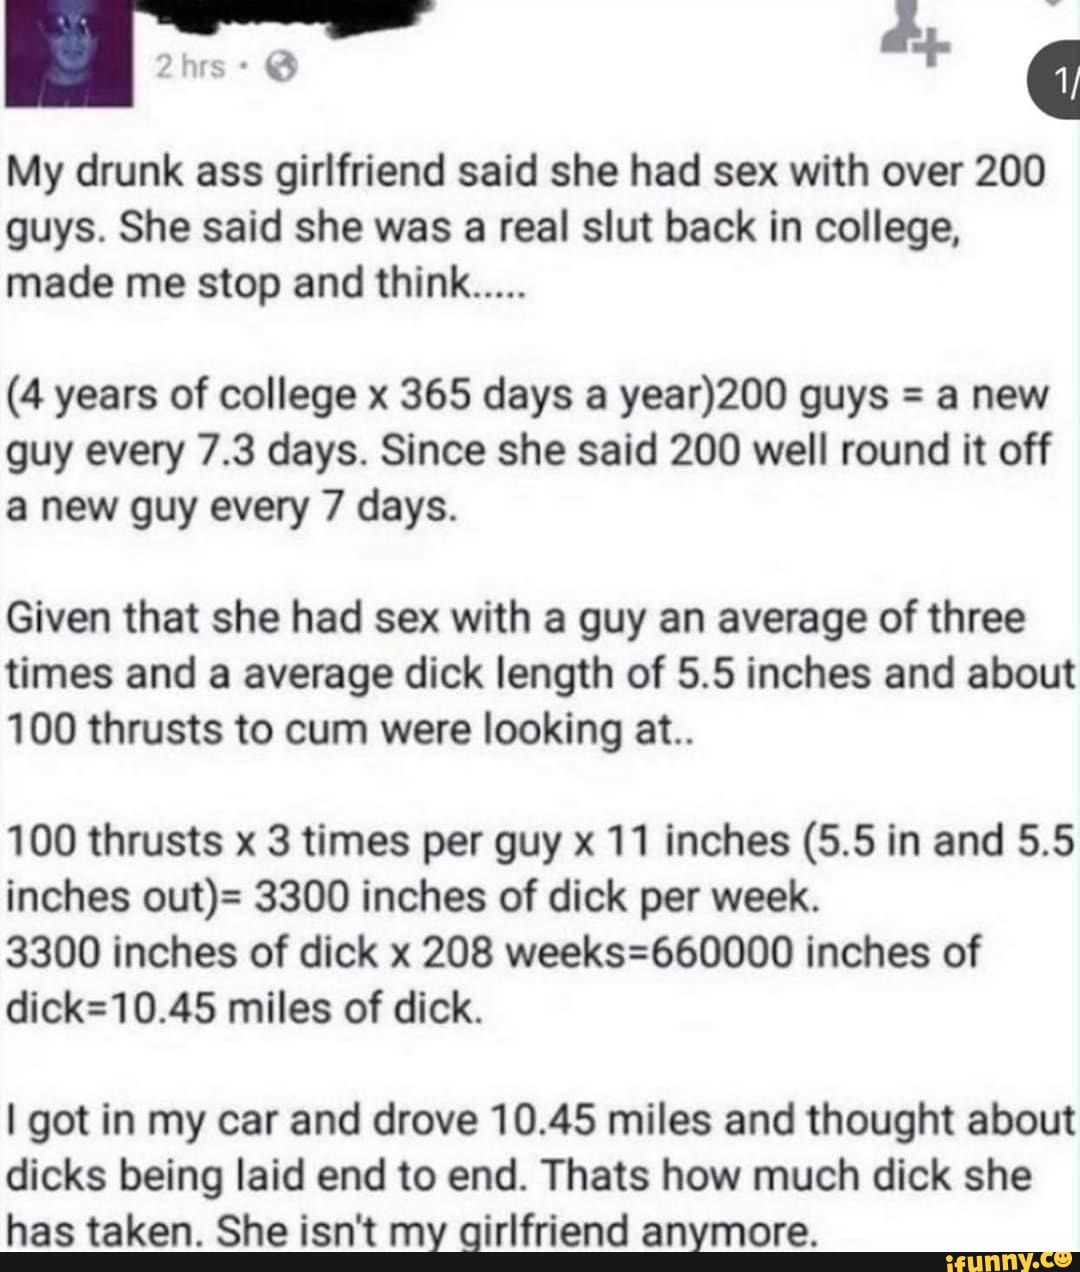 My drunk ass girlfriend said she had sex with over 200 guys